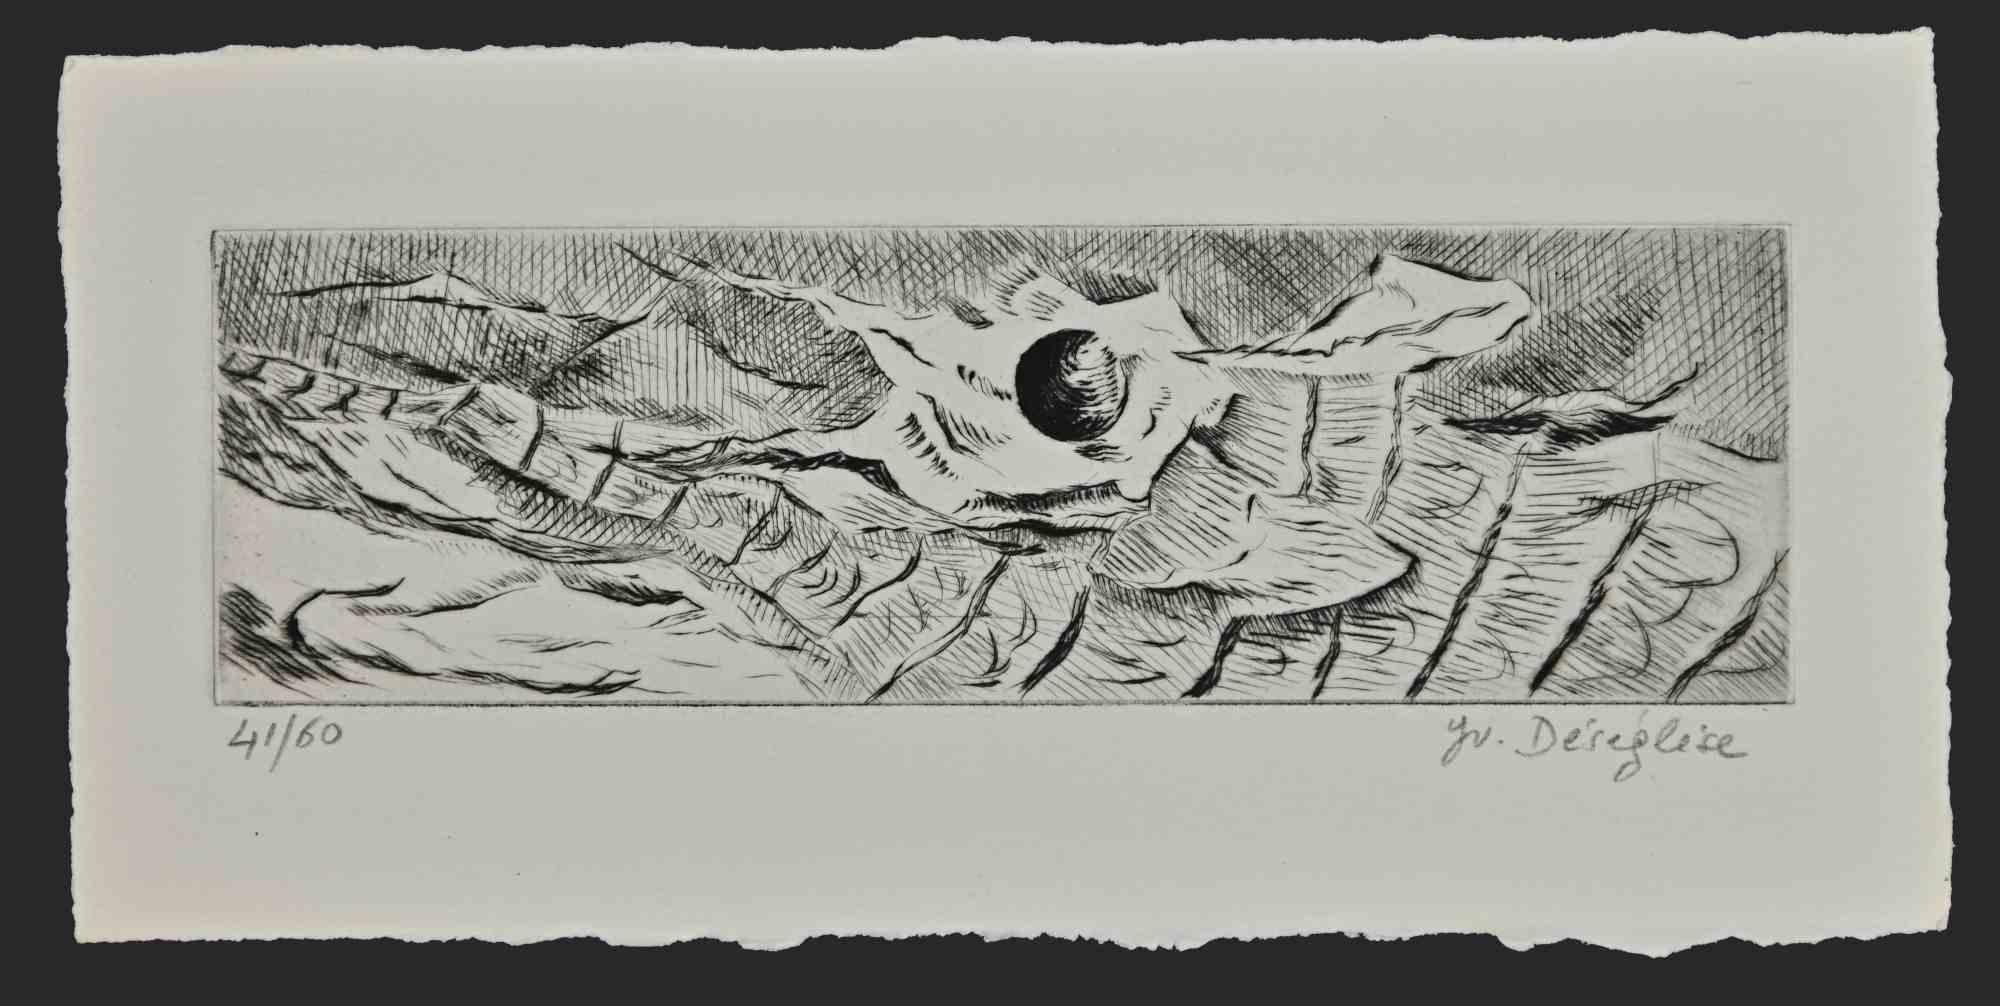 Jeanette Deseglise Figurative Print - Abstract Composition - Original Etching by Jeanette Déséglise - mid-20 Century 